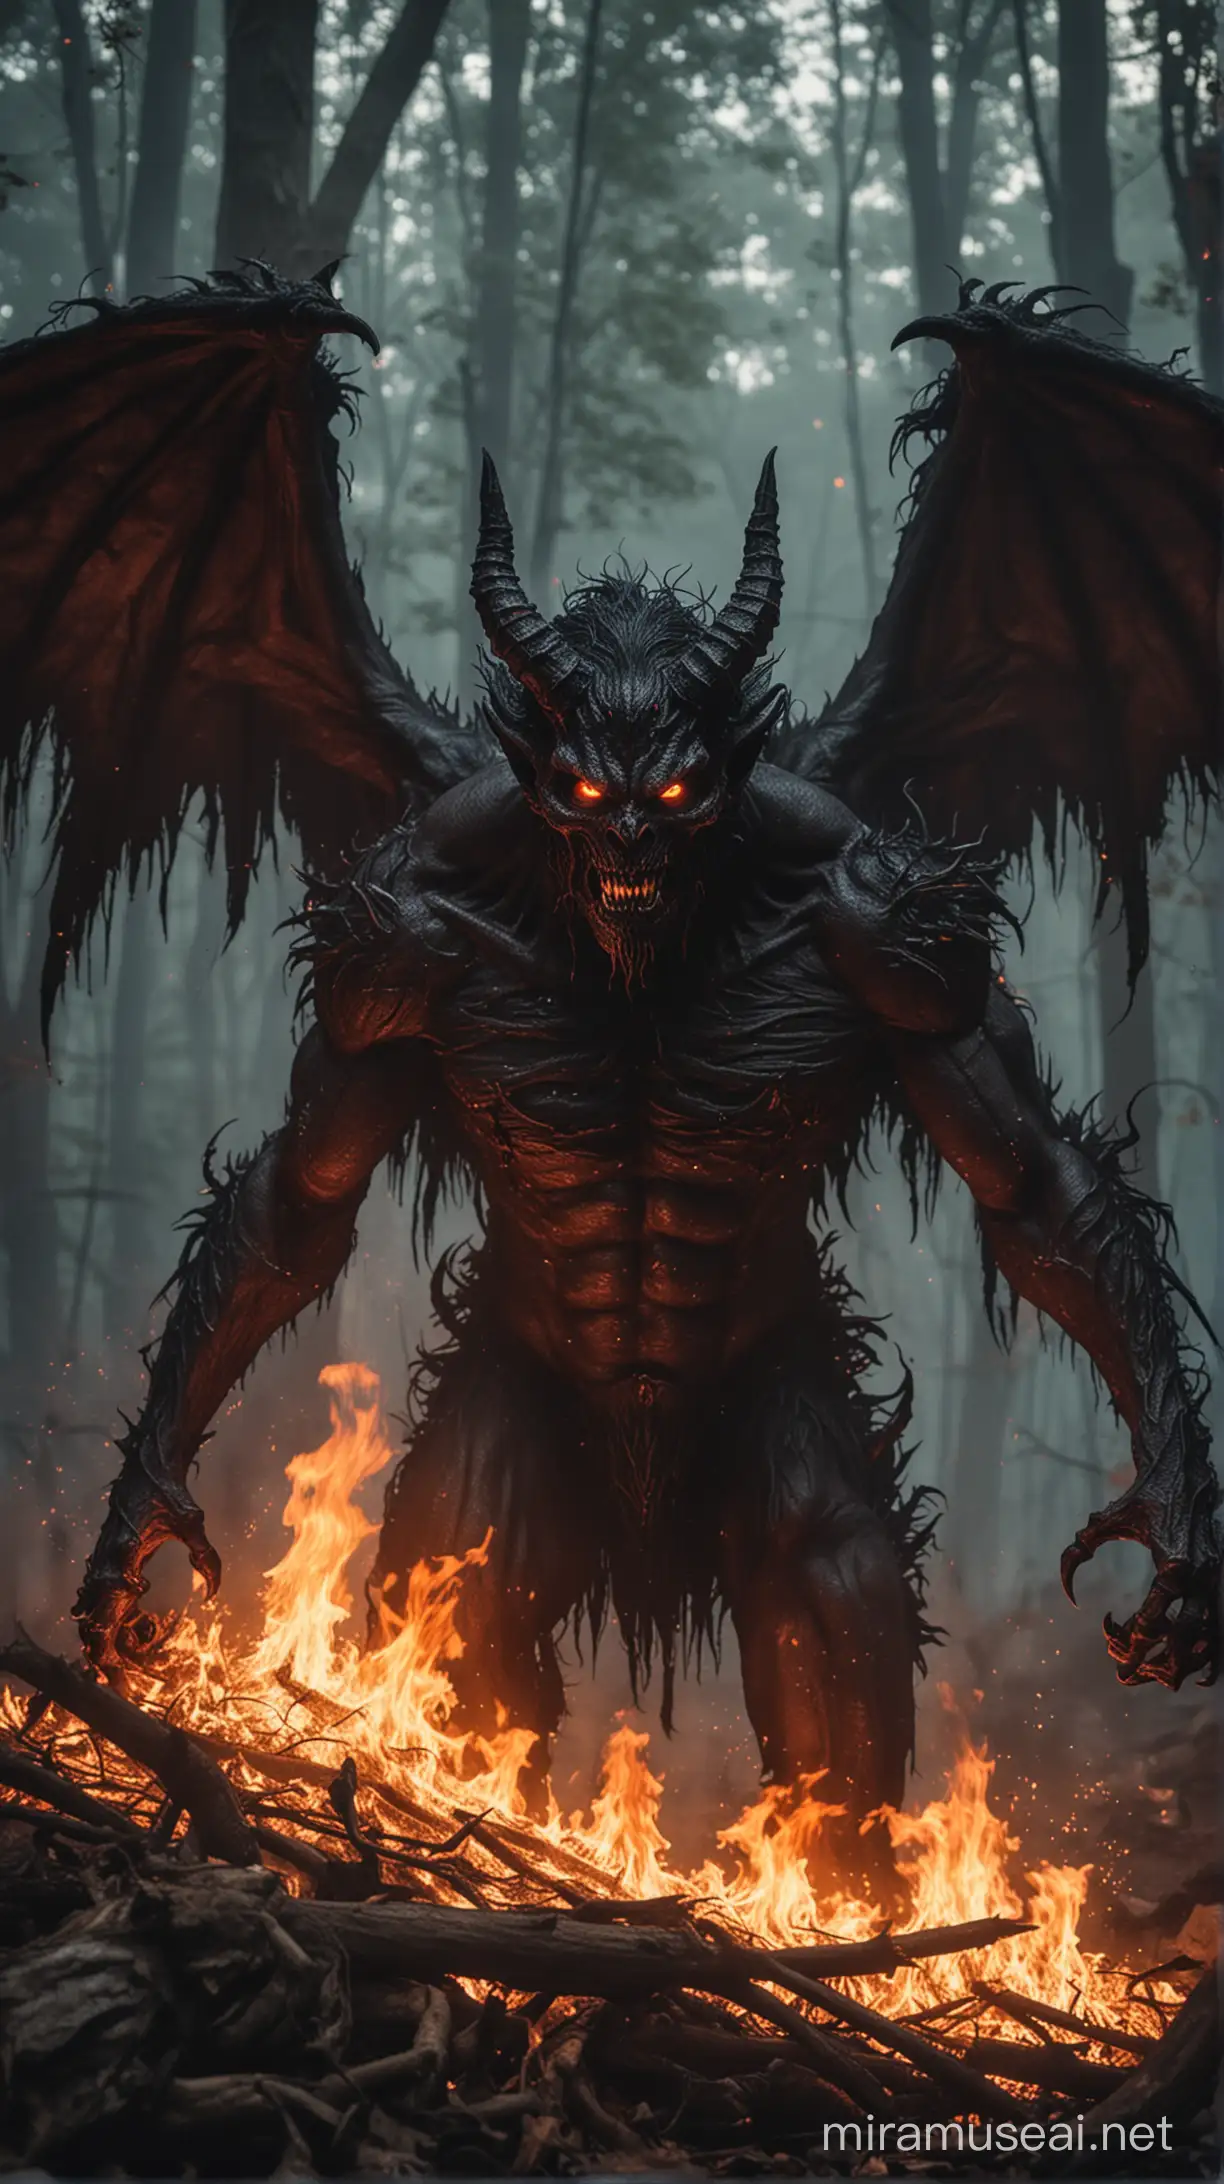 a close up of a demon with glowing eyes in the woods, satan in hell, fire demon, scary horrifying satanic rituals, conjuring a demon, demonic creature, man male demon, demon lord, one a demon - like creature, one a demon-like creature, human male demon, hell background, burning in hell, portrait of a demon, demon male, hell scape, has wings on the back,

